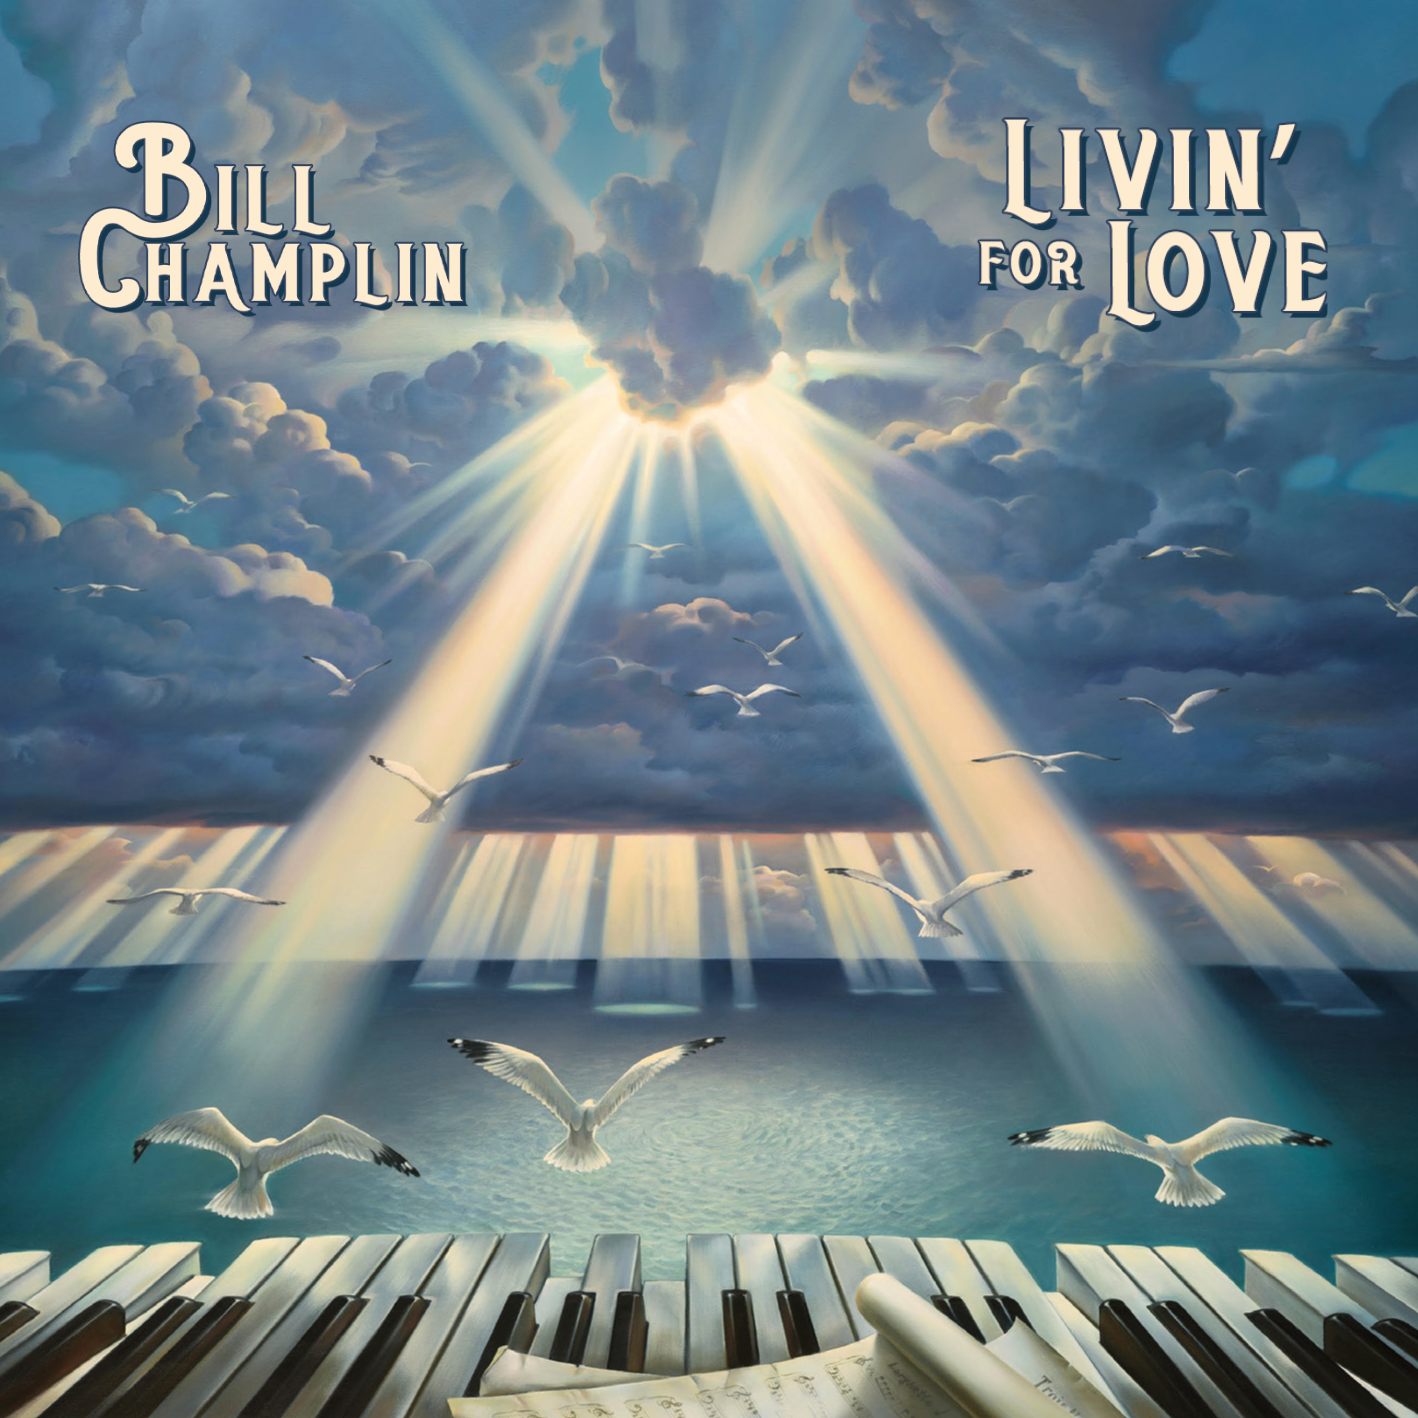 Bill Champlin ‘Livin’ For Love’ – Available now!